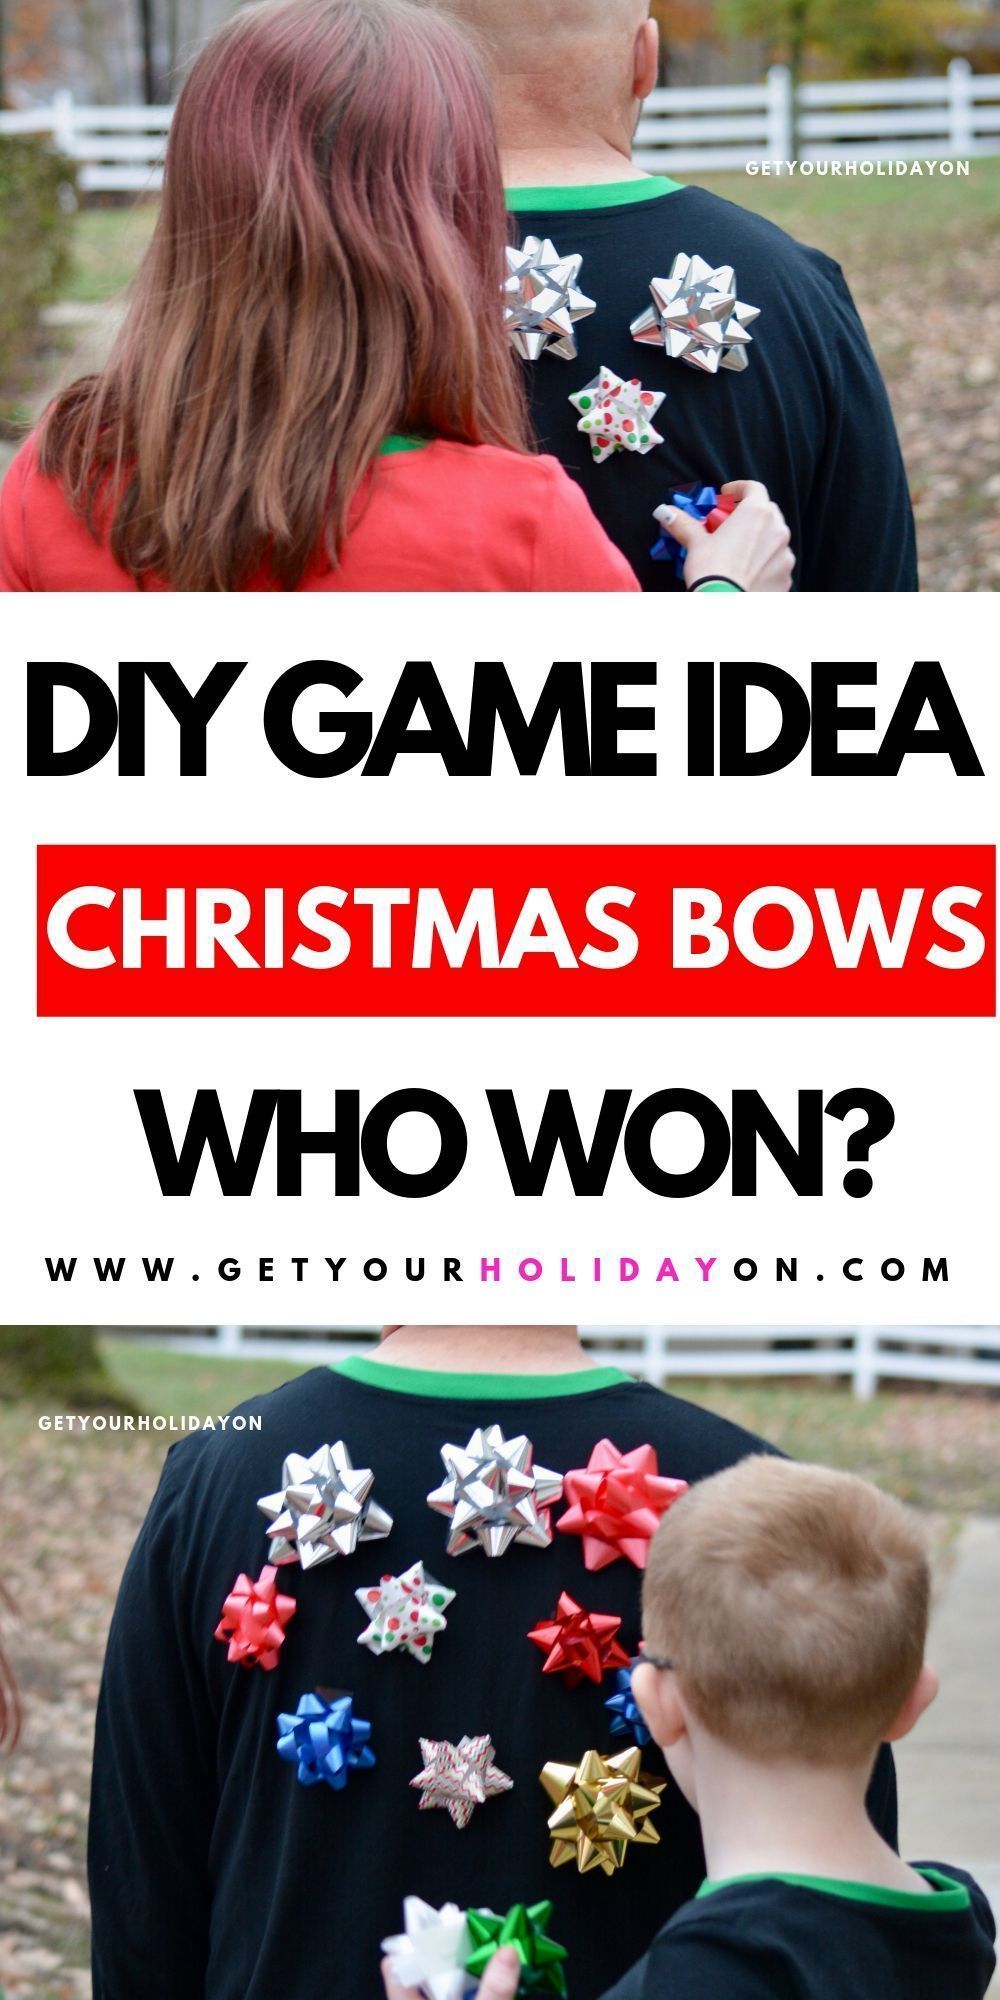 How to Play a Game with Christmas Bows | Get Your Holiday On - How to Play a Game with Christmas Bows | Get Your Holiday On -   18 diy Christmas games ideas